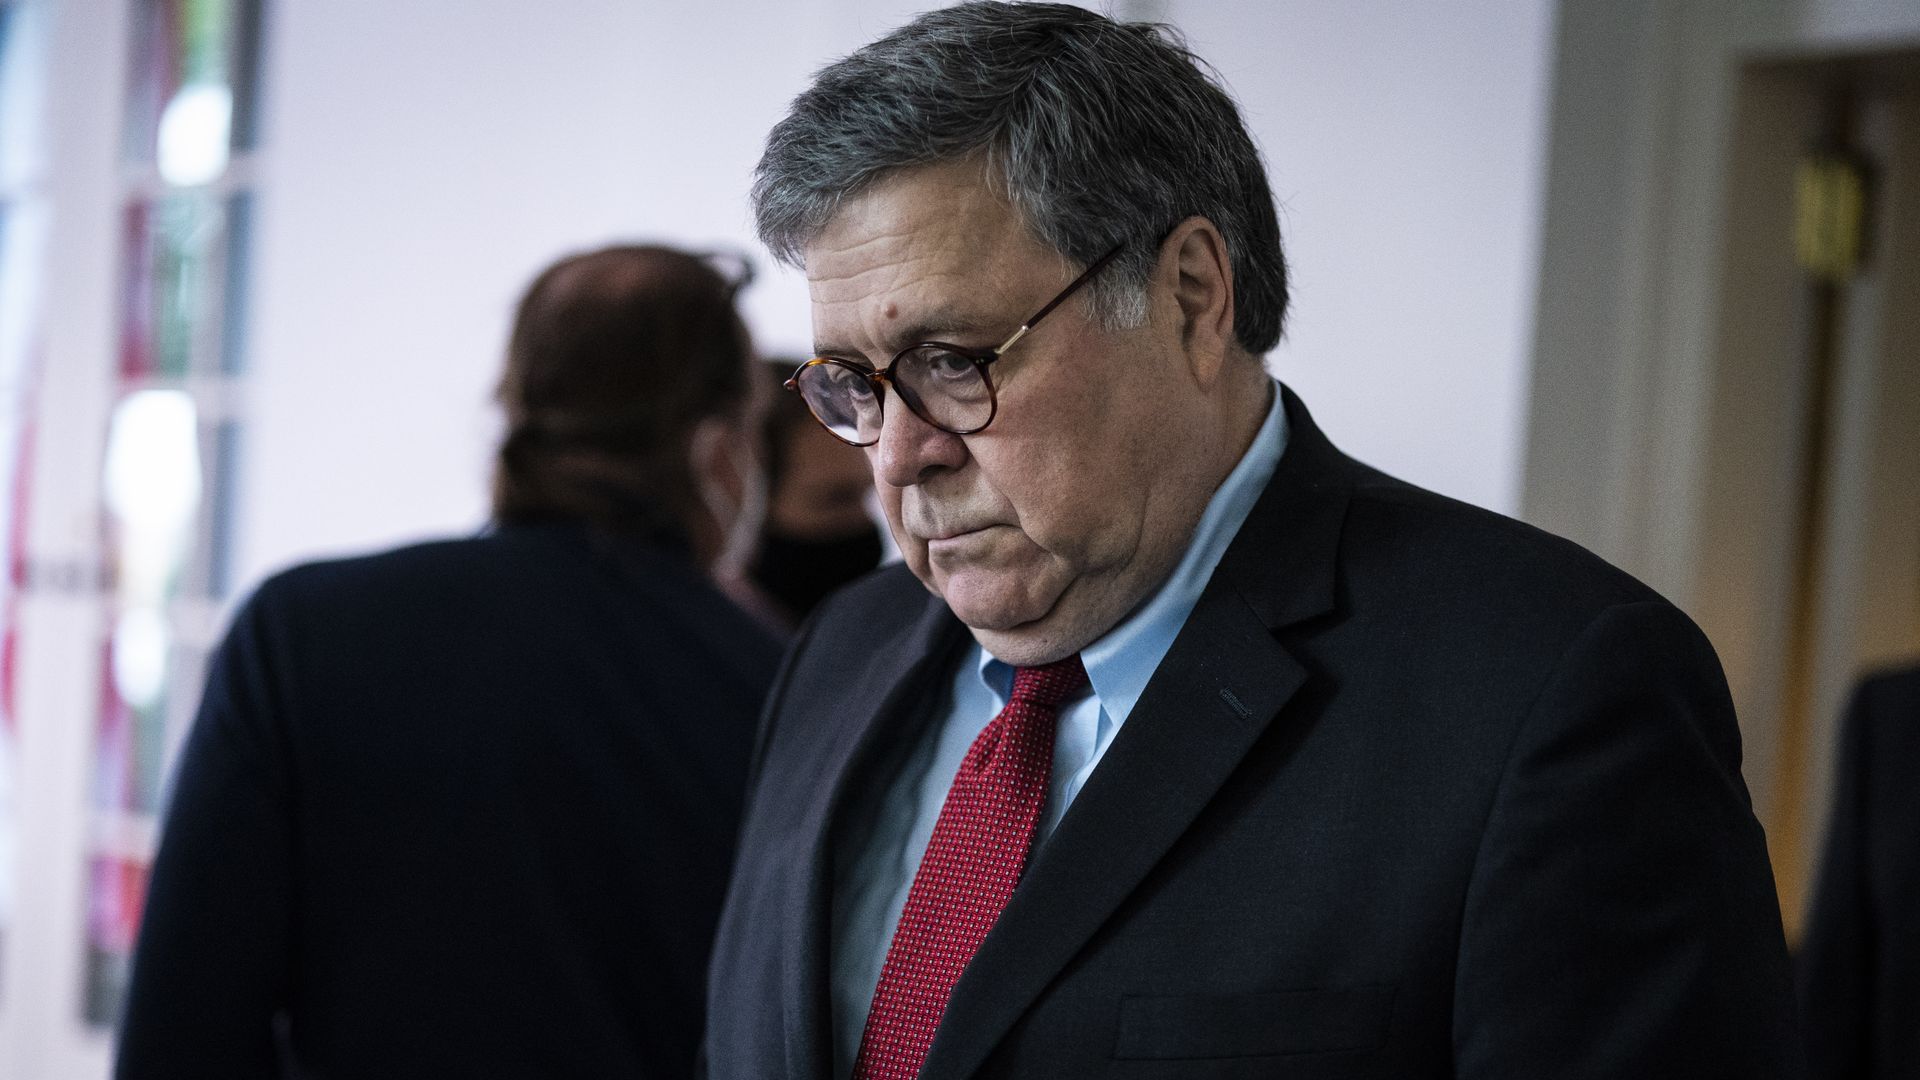 Attorney General Bill Barr stares into space at a ceremony 